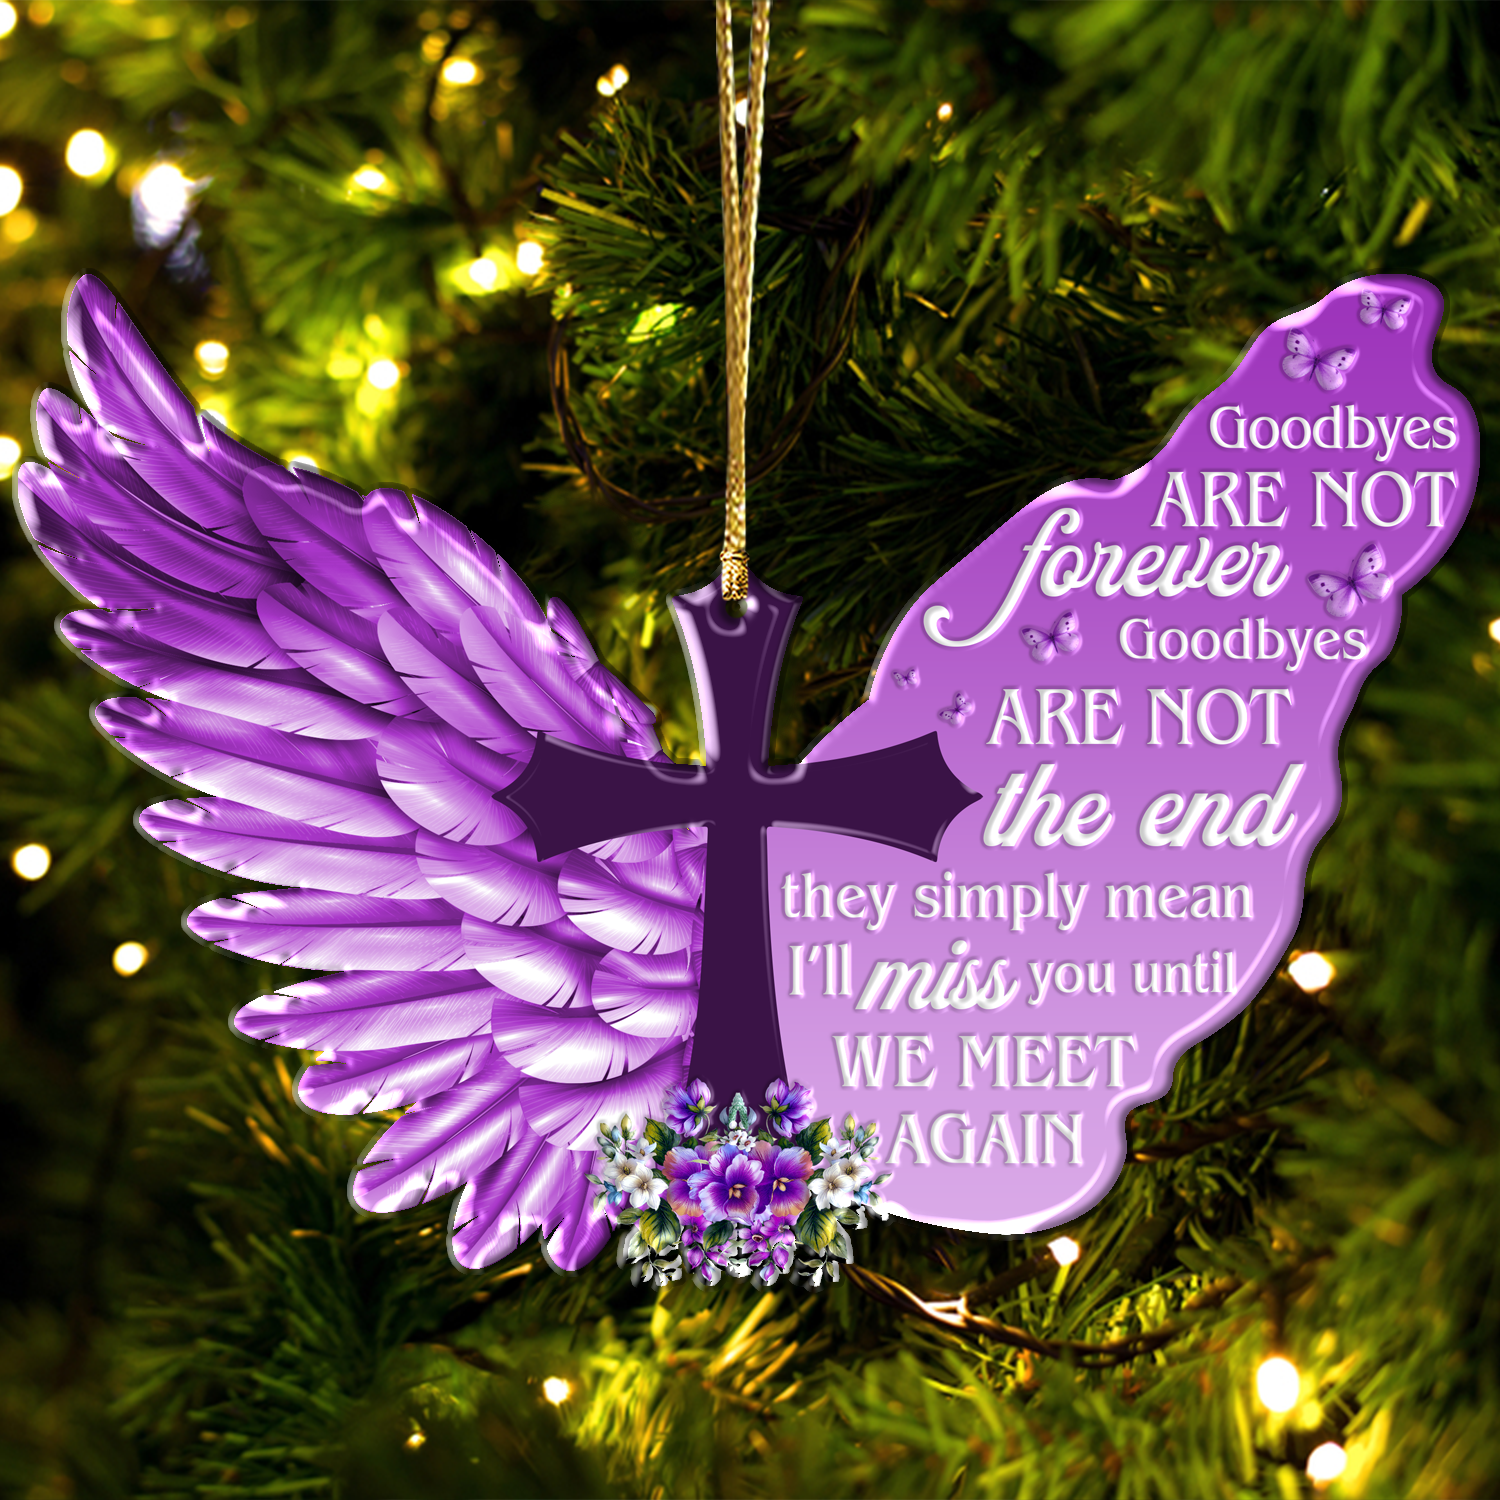 Wings Cross Goodbyes Are Not The End Christian Ornament Gift Bible Verse Christmas Ornament Car Hanging